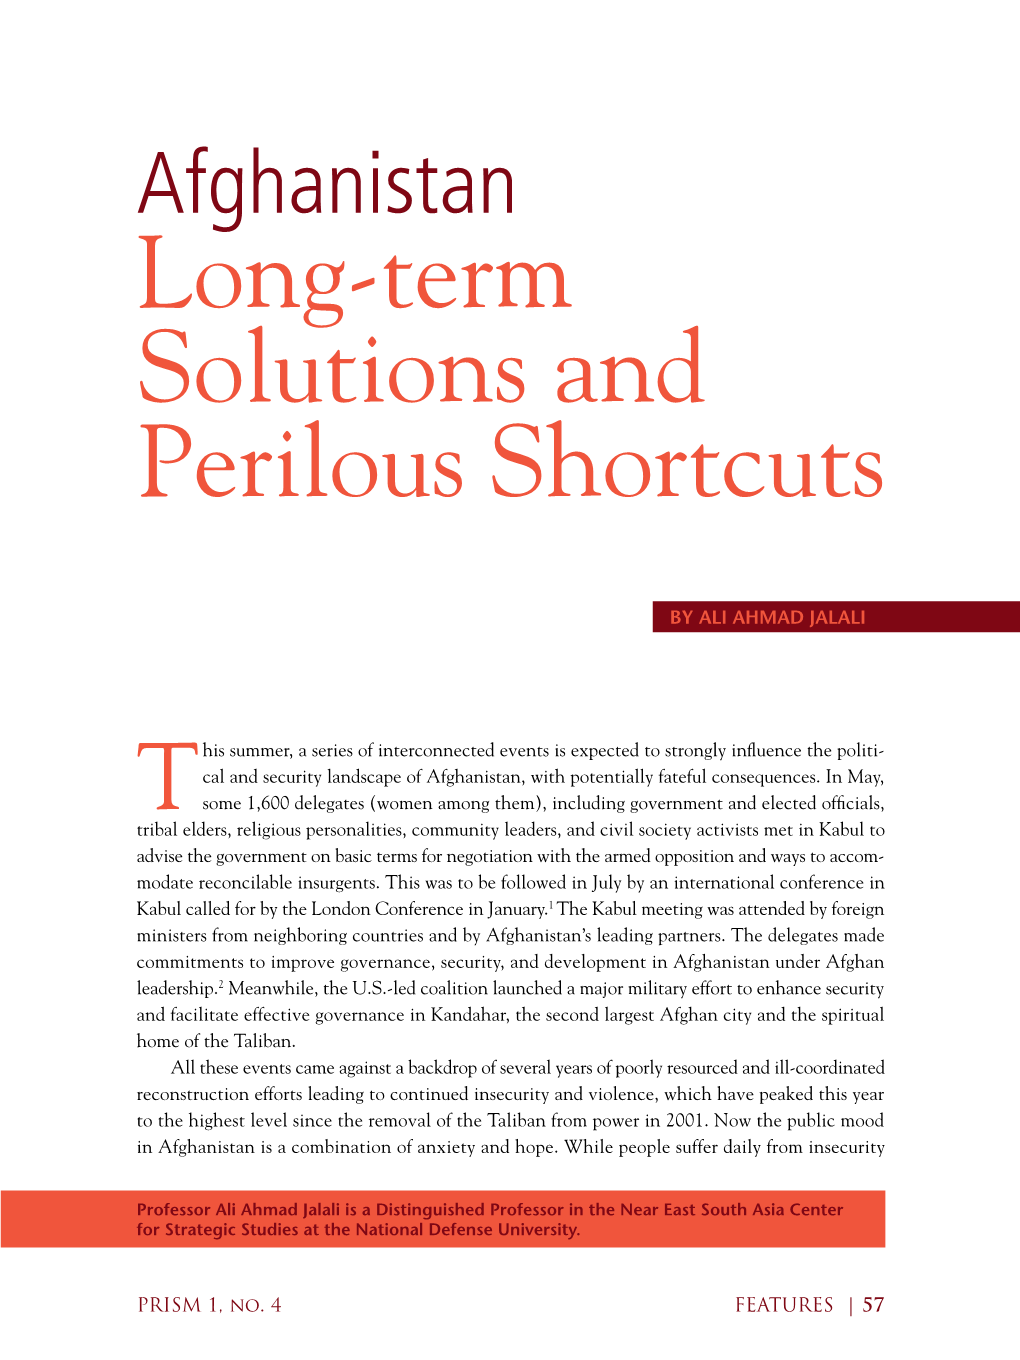 Afghanistan Long-Term Solutions and Perilous Shortcuts